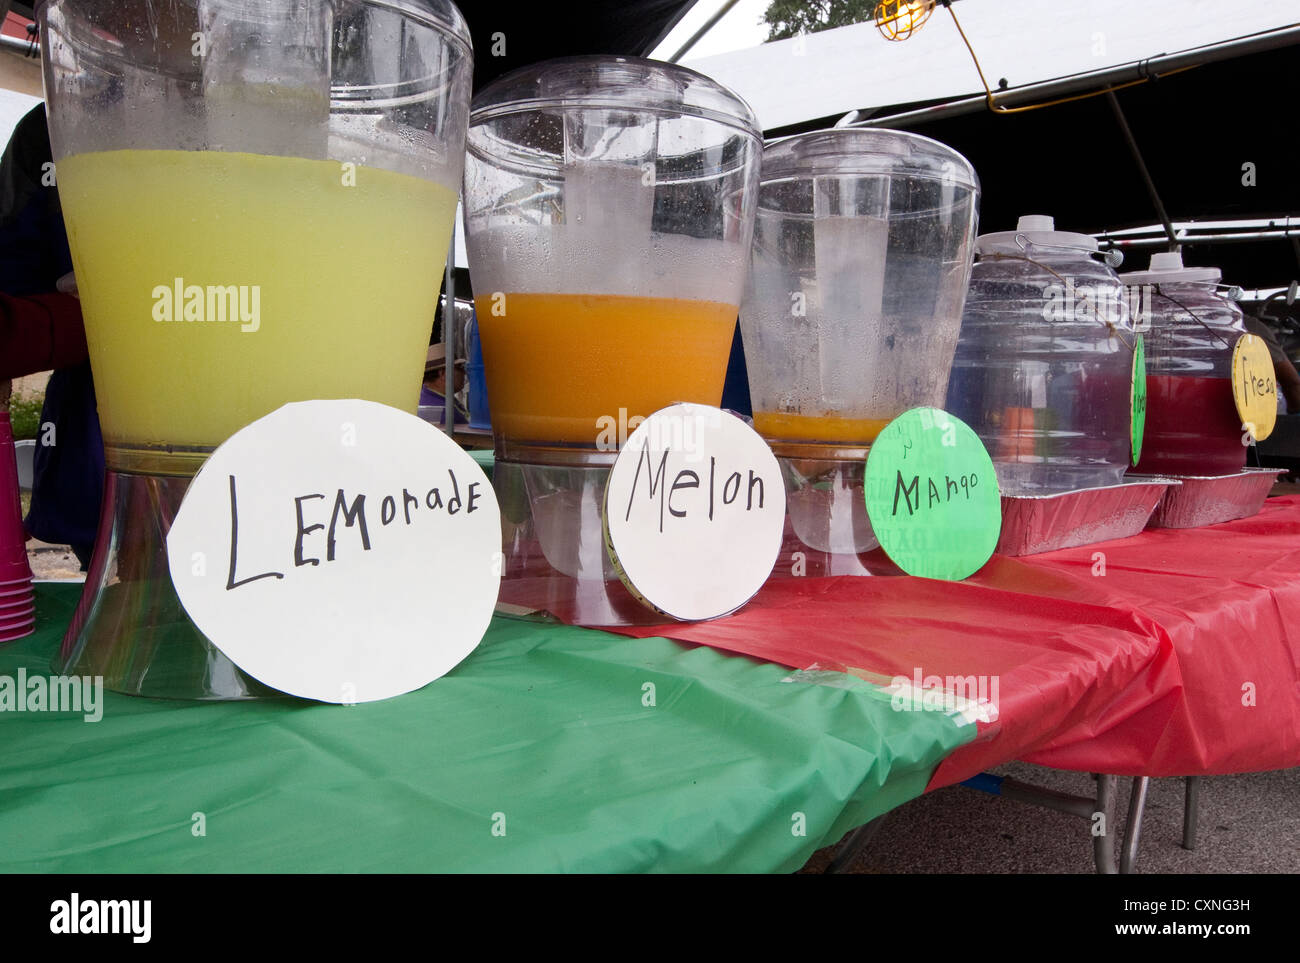 Jugs full of fruit flavored water at a food booth during Catholic church outdoor festival in Austin, Texas Stock Photo